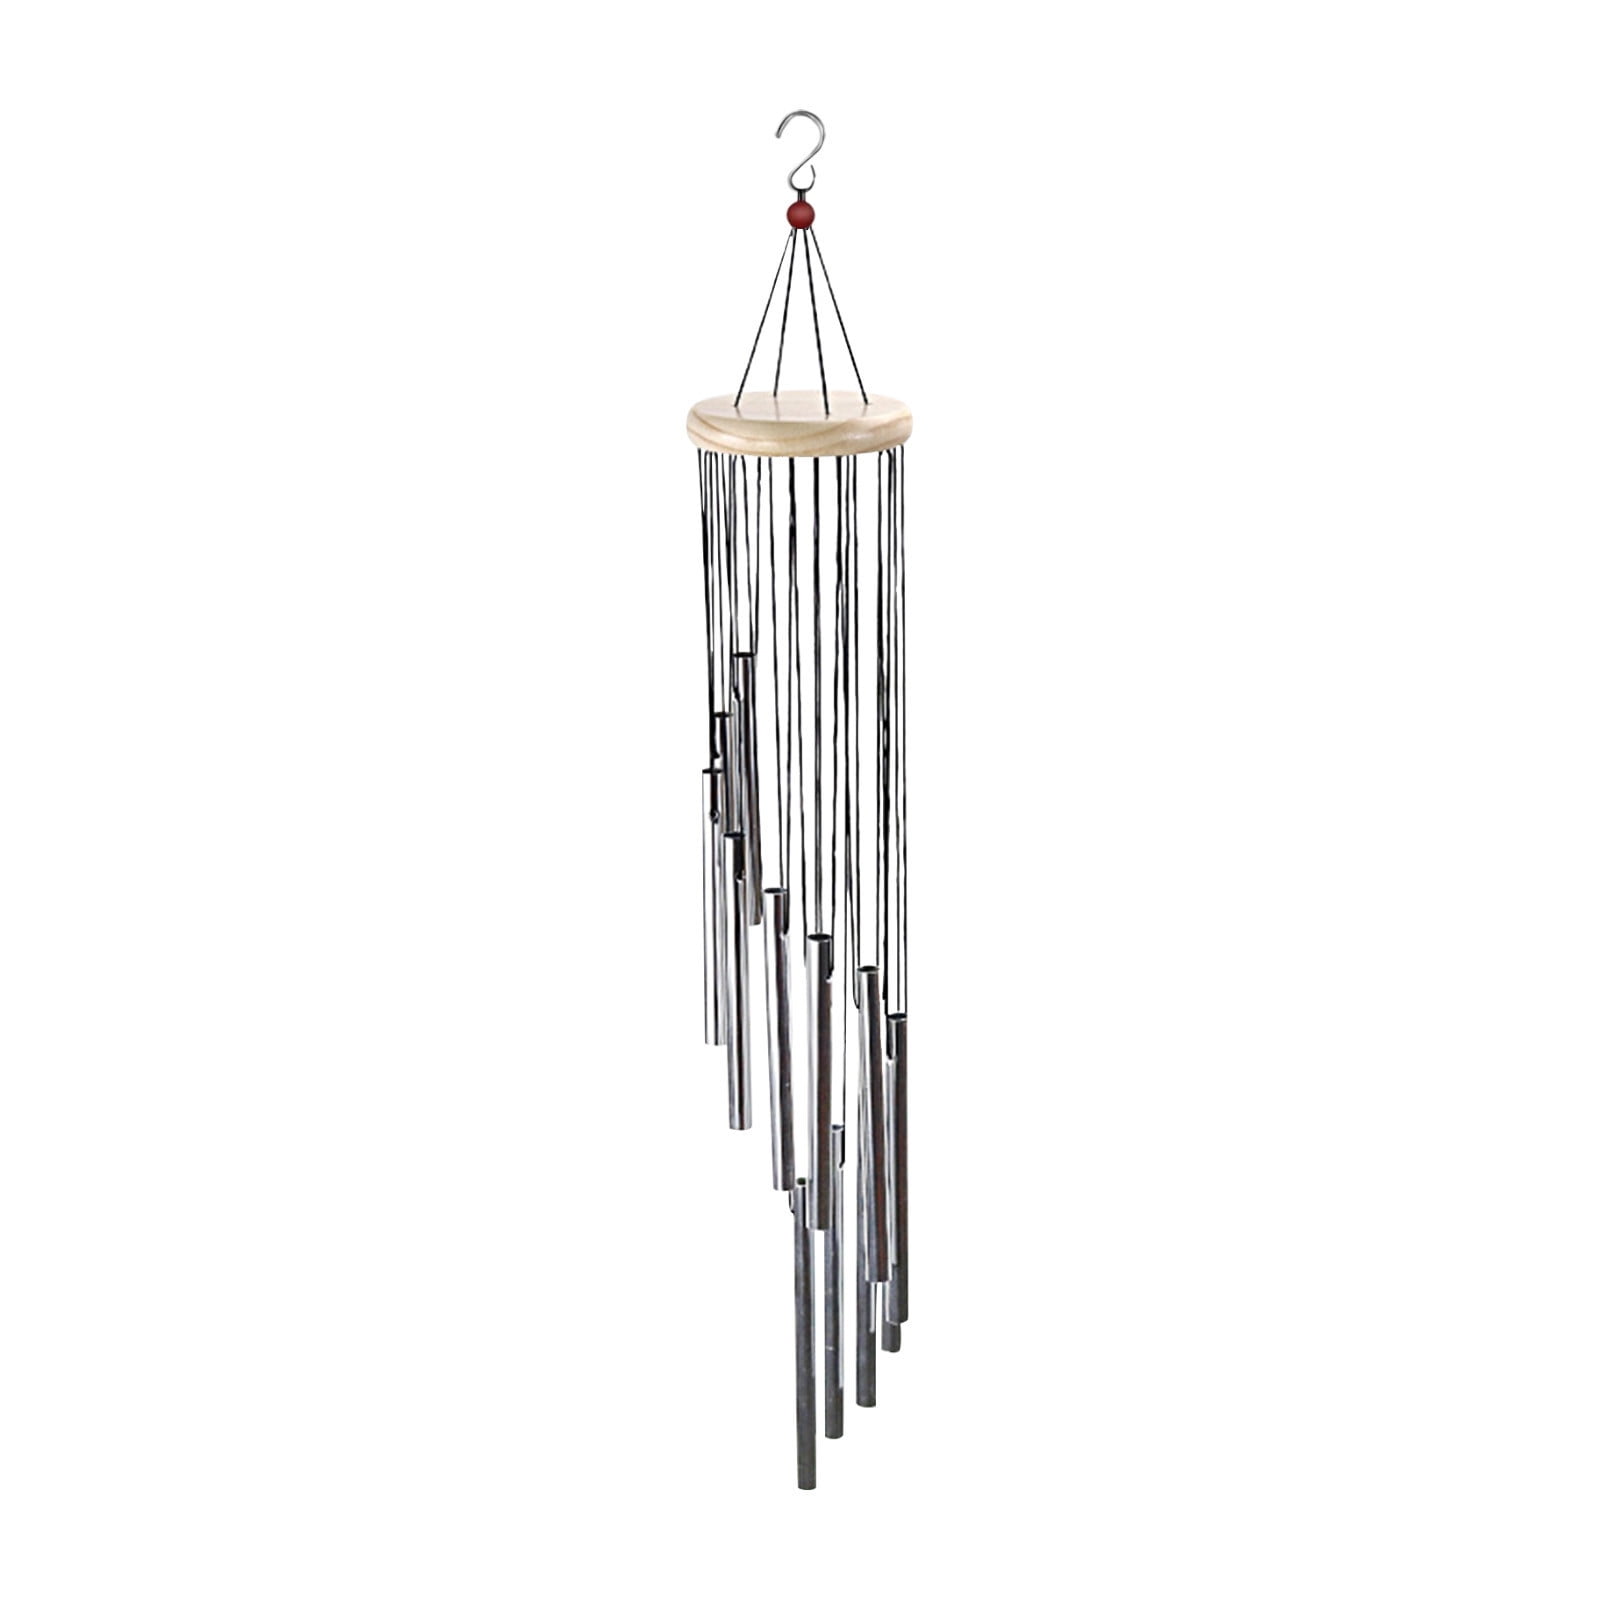 Creative Wood Metal Multi-tube Wind Chime Car Interior With Cerium Product,  New House Door Bell With Cerium 